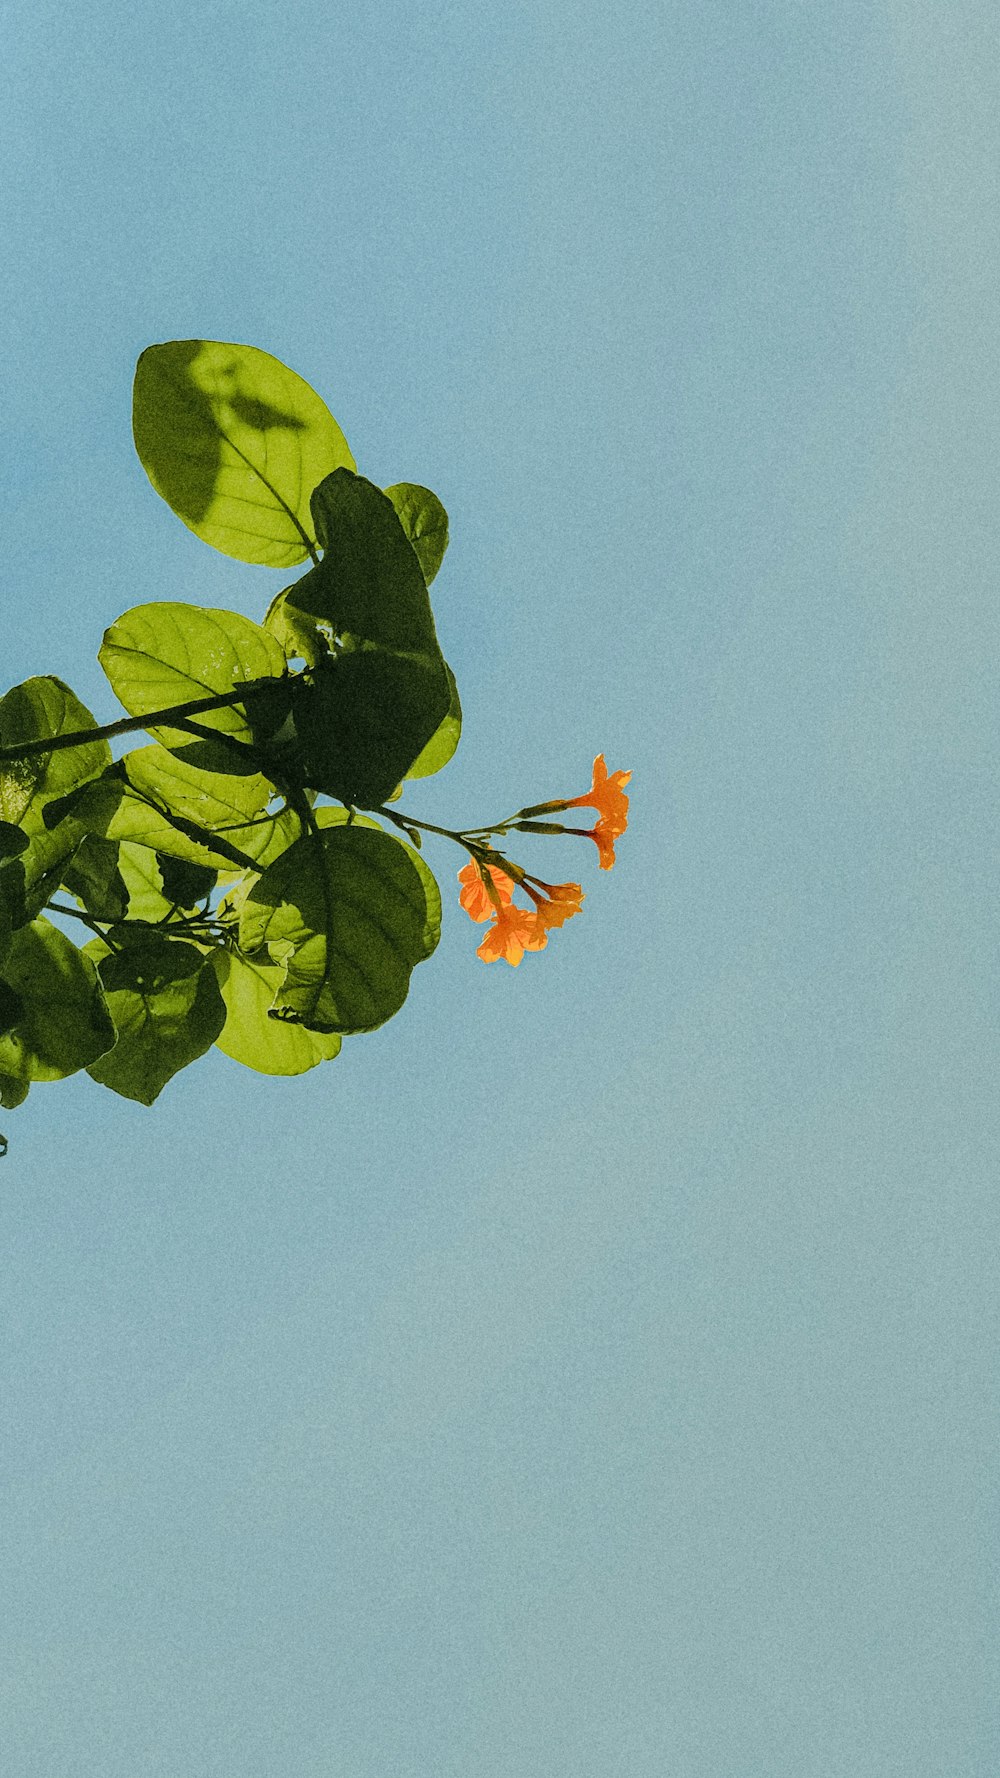 a tree branch with orange flowers against a blue sky